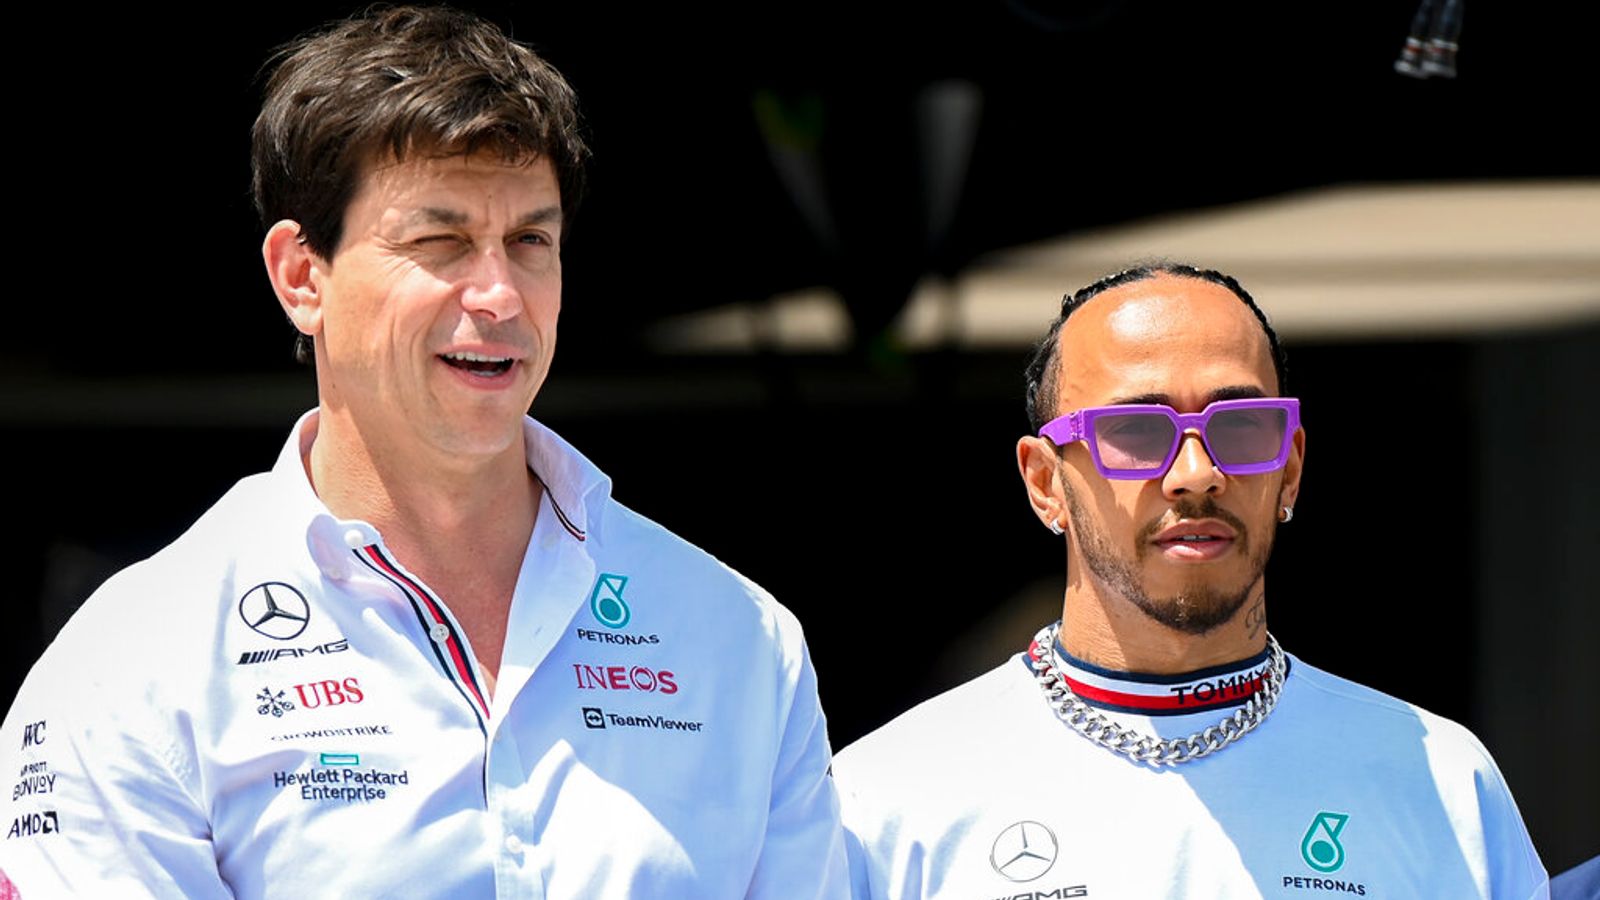 mercedes boss says timing of hamilton's ferrari decision 'bit us' - but insists he holds 'no grudge'